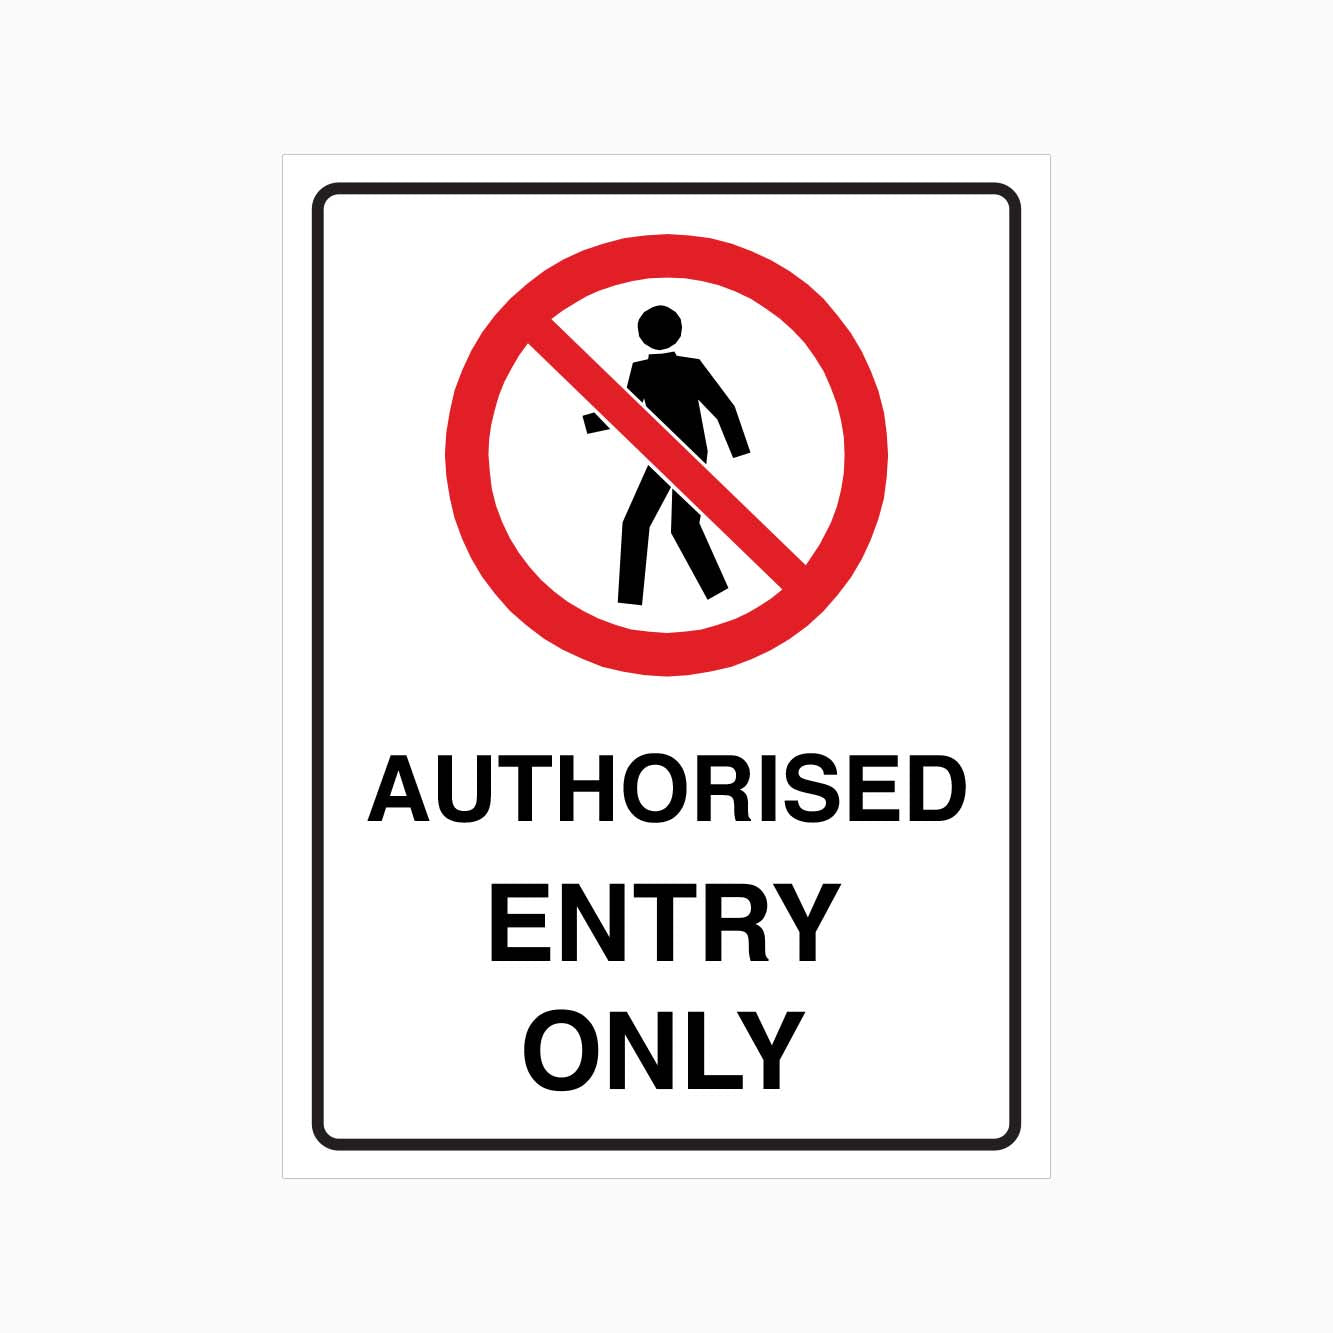 AUTHORISED ENTRY ONLY SIGN - GET SIGNS